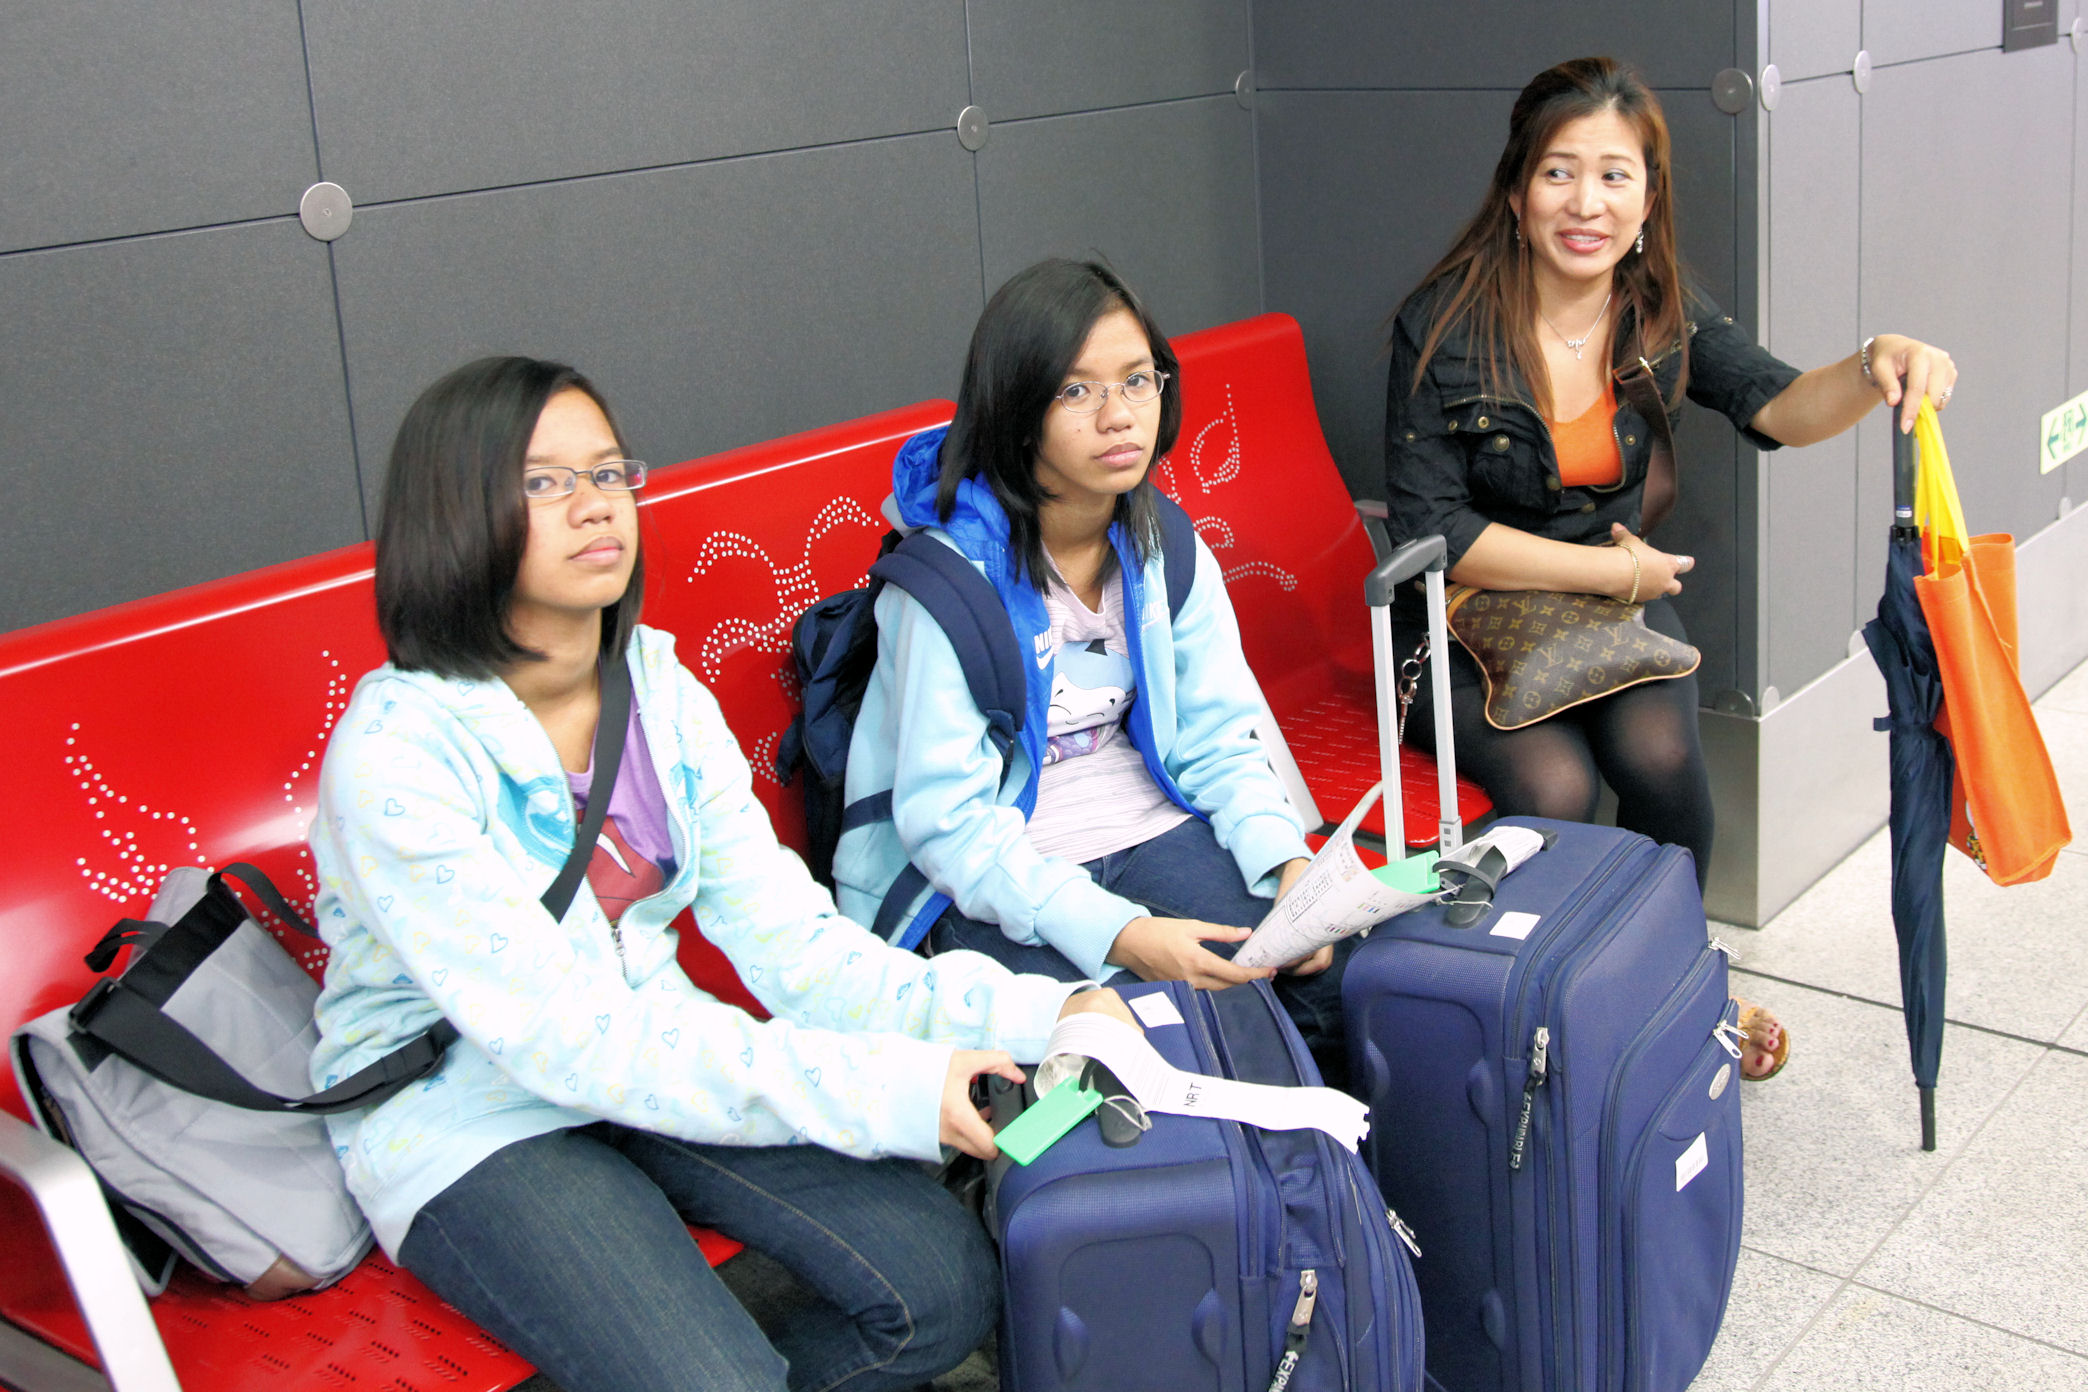 three asian women wait on a bench for luggage to pick up